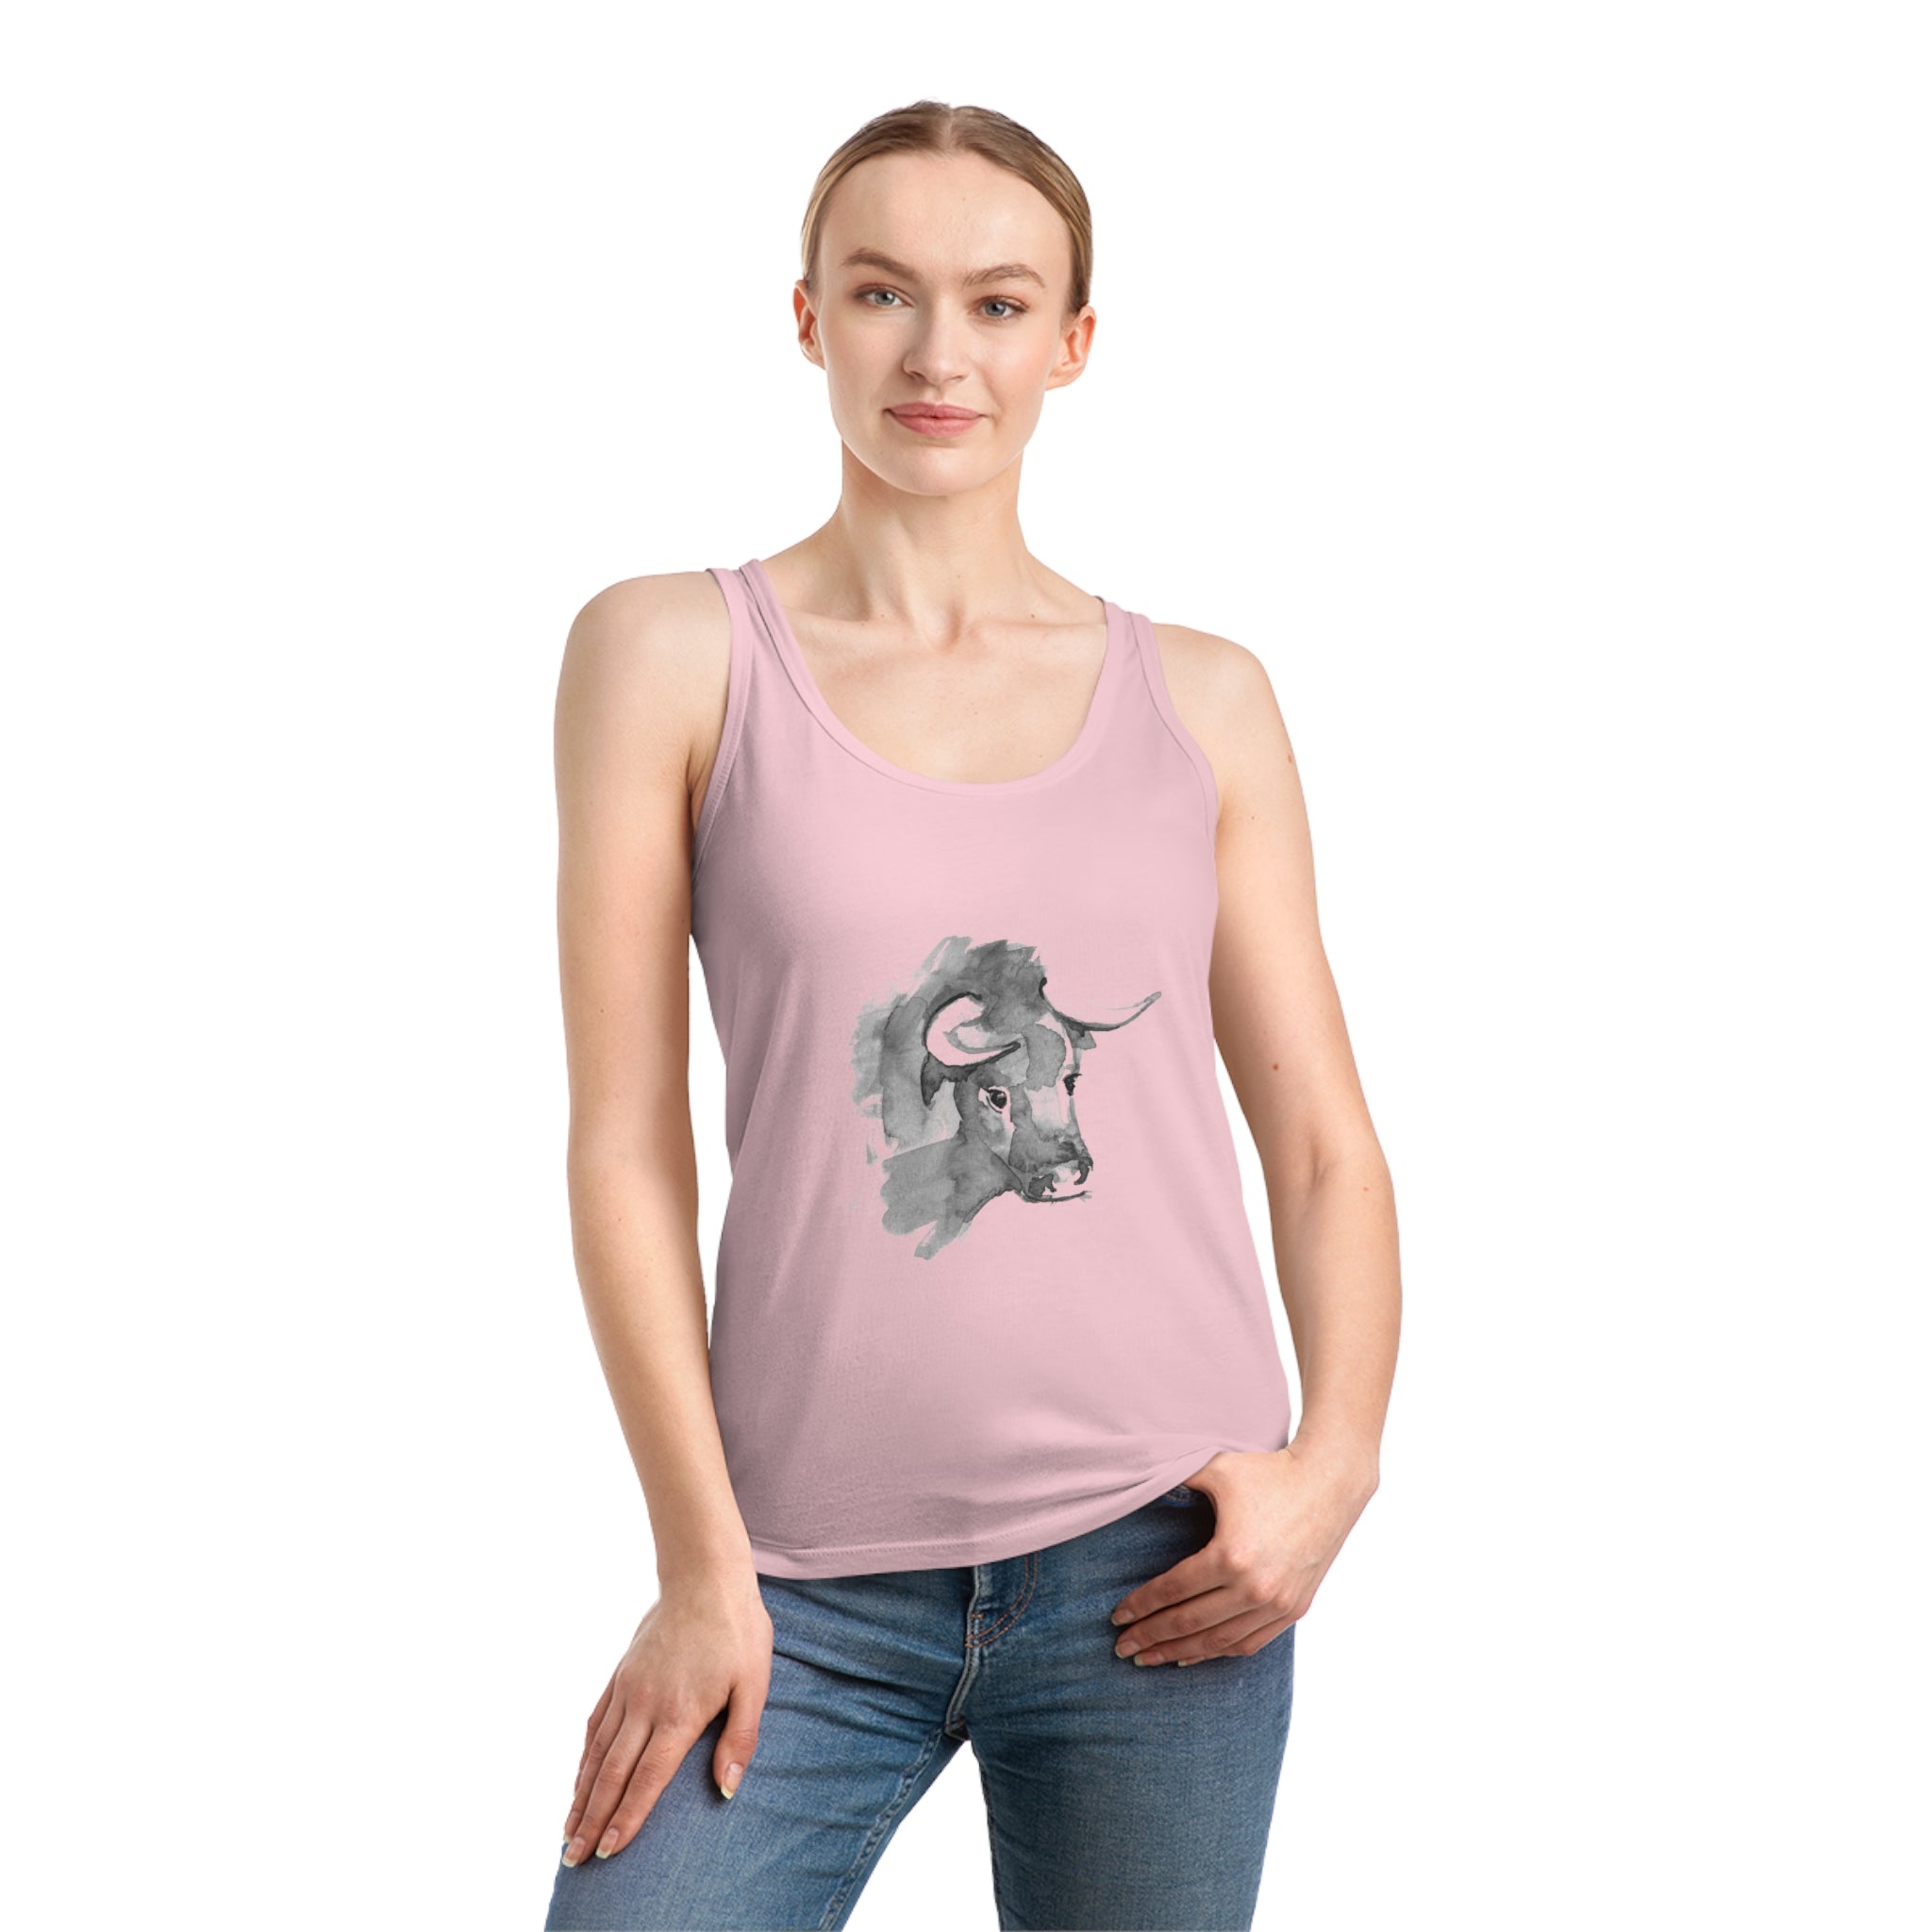 A woman wearing the Ox Women's Dreamer Tank Top with an elephant on it.